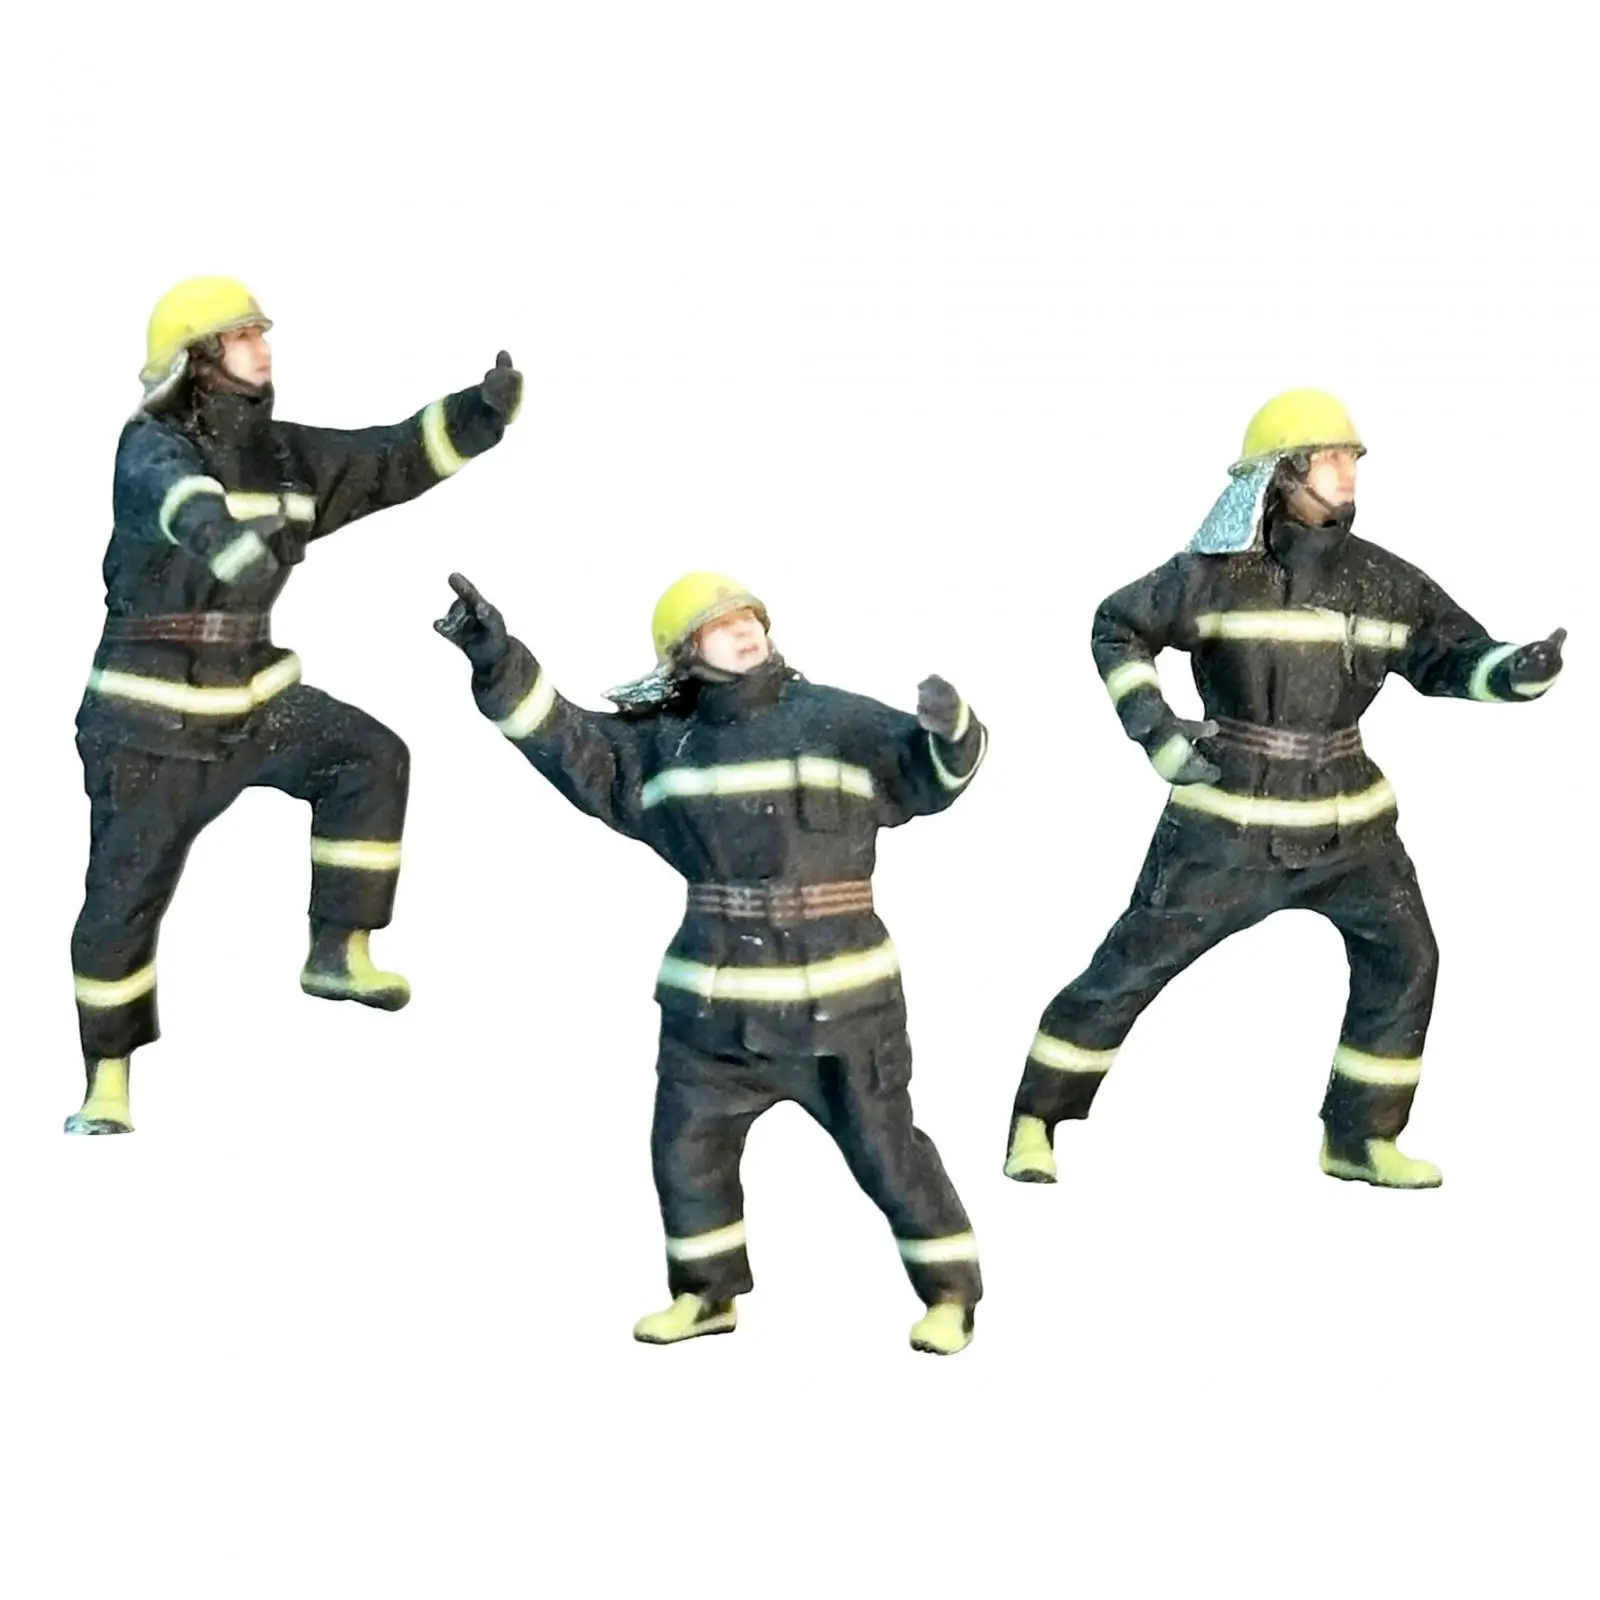 3 Pieces Miniature Firefighter Figures Pretend Play Tiny People Model for Diorama Dollhouse DIY Scene Photography Props Layout